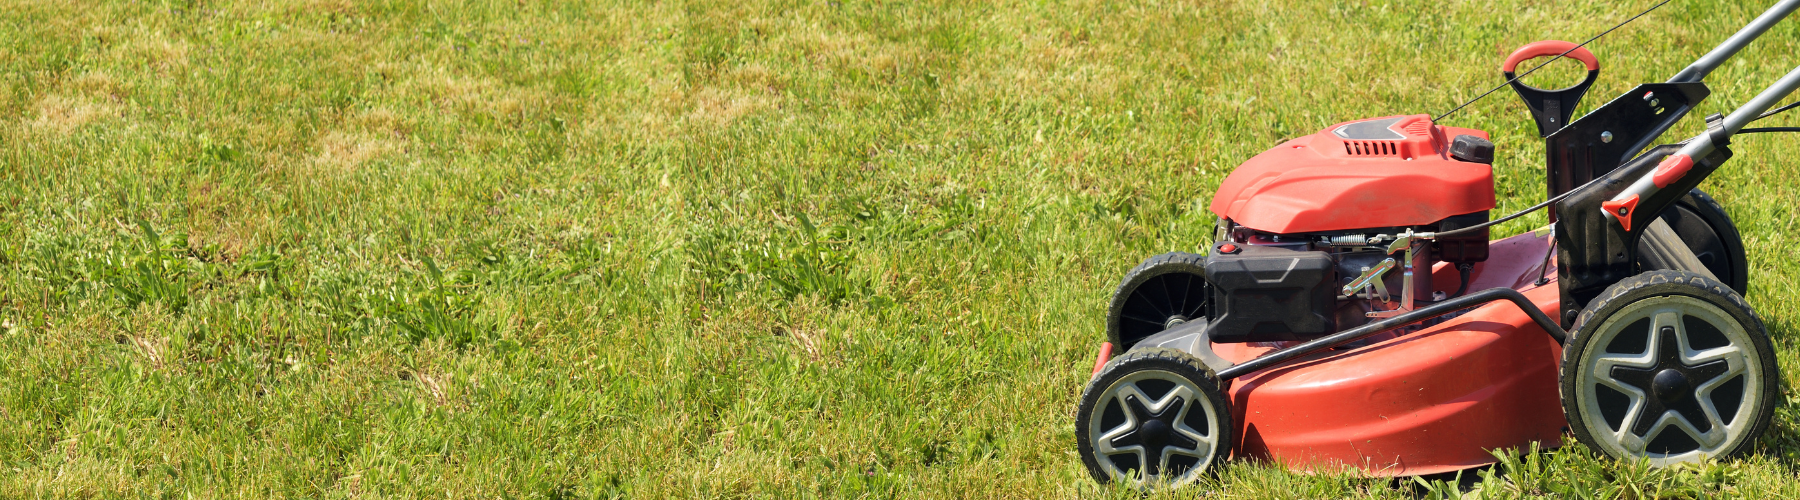 A red lawnmower on a grass lawn background.